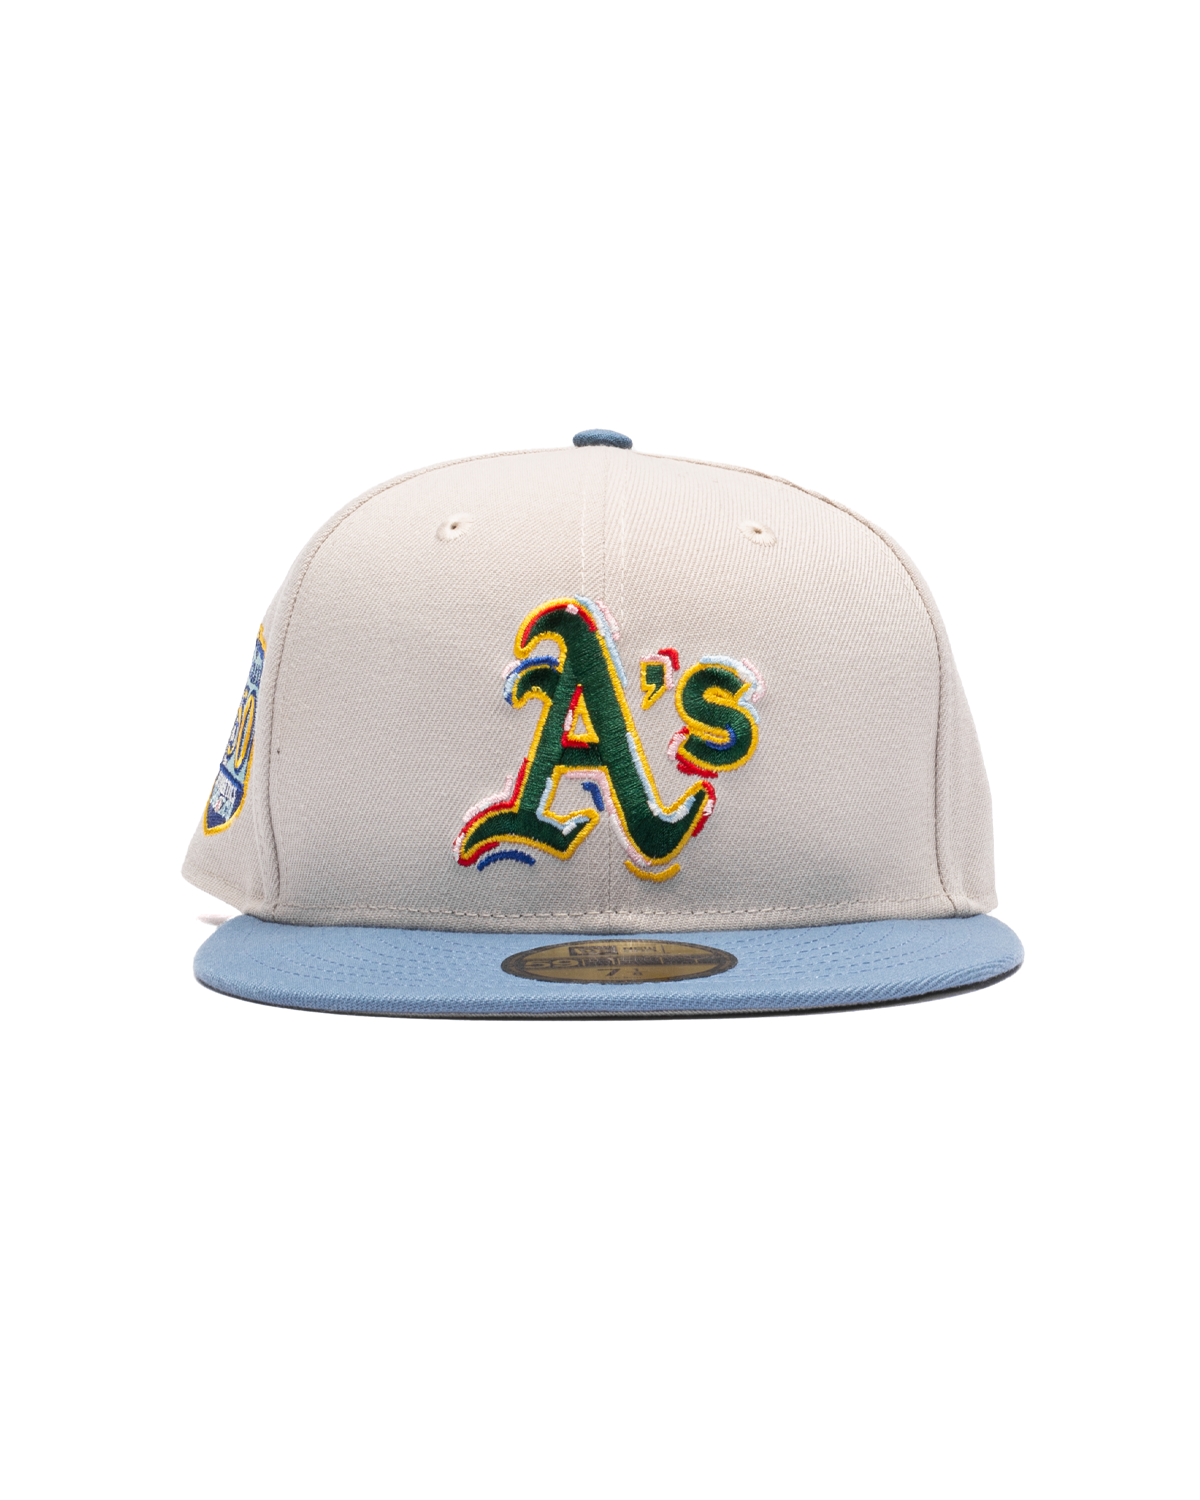 Oakland Athletics Color Brush Fitted Hat